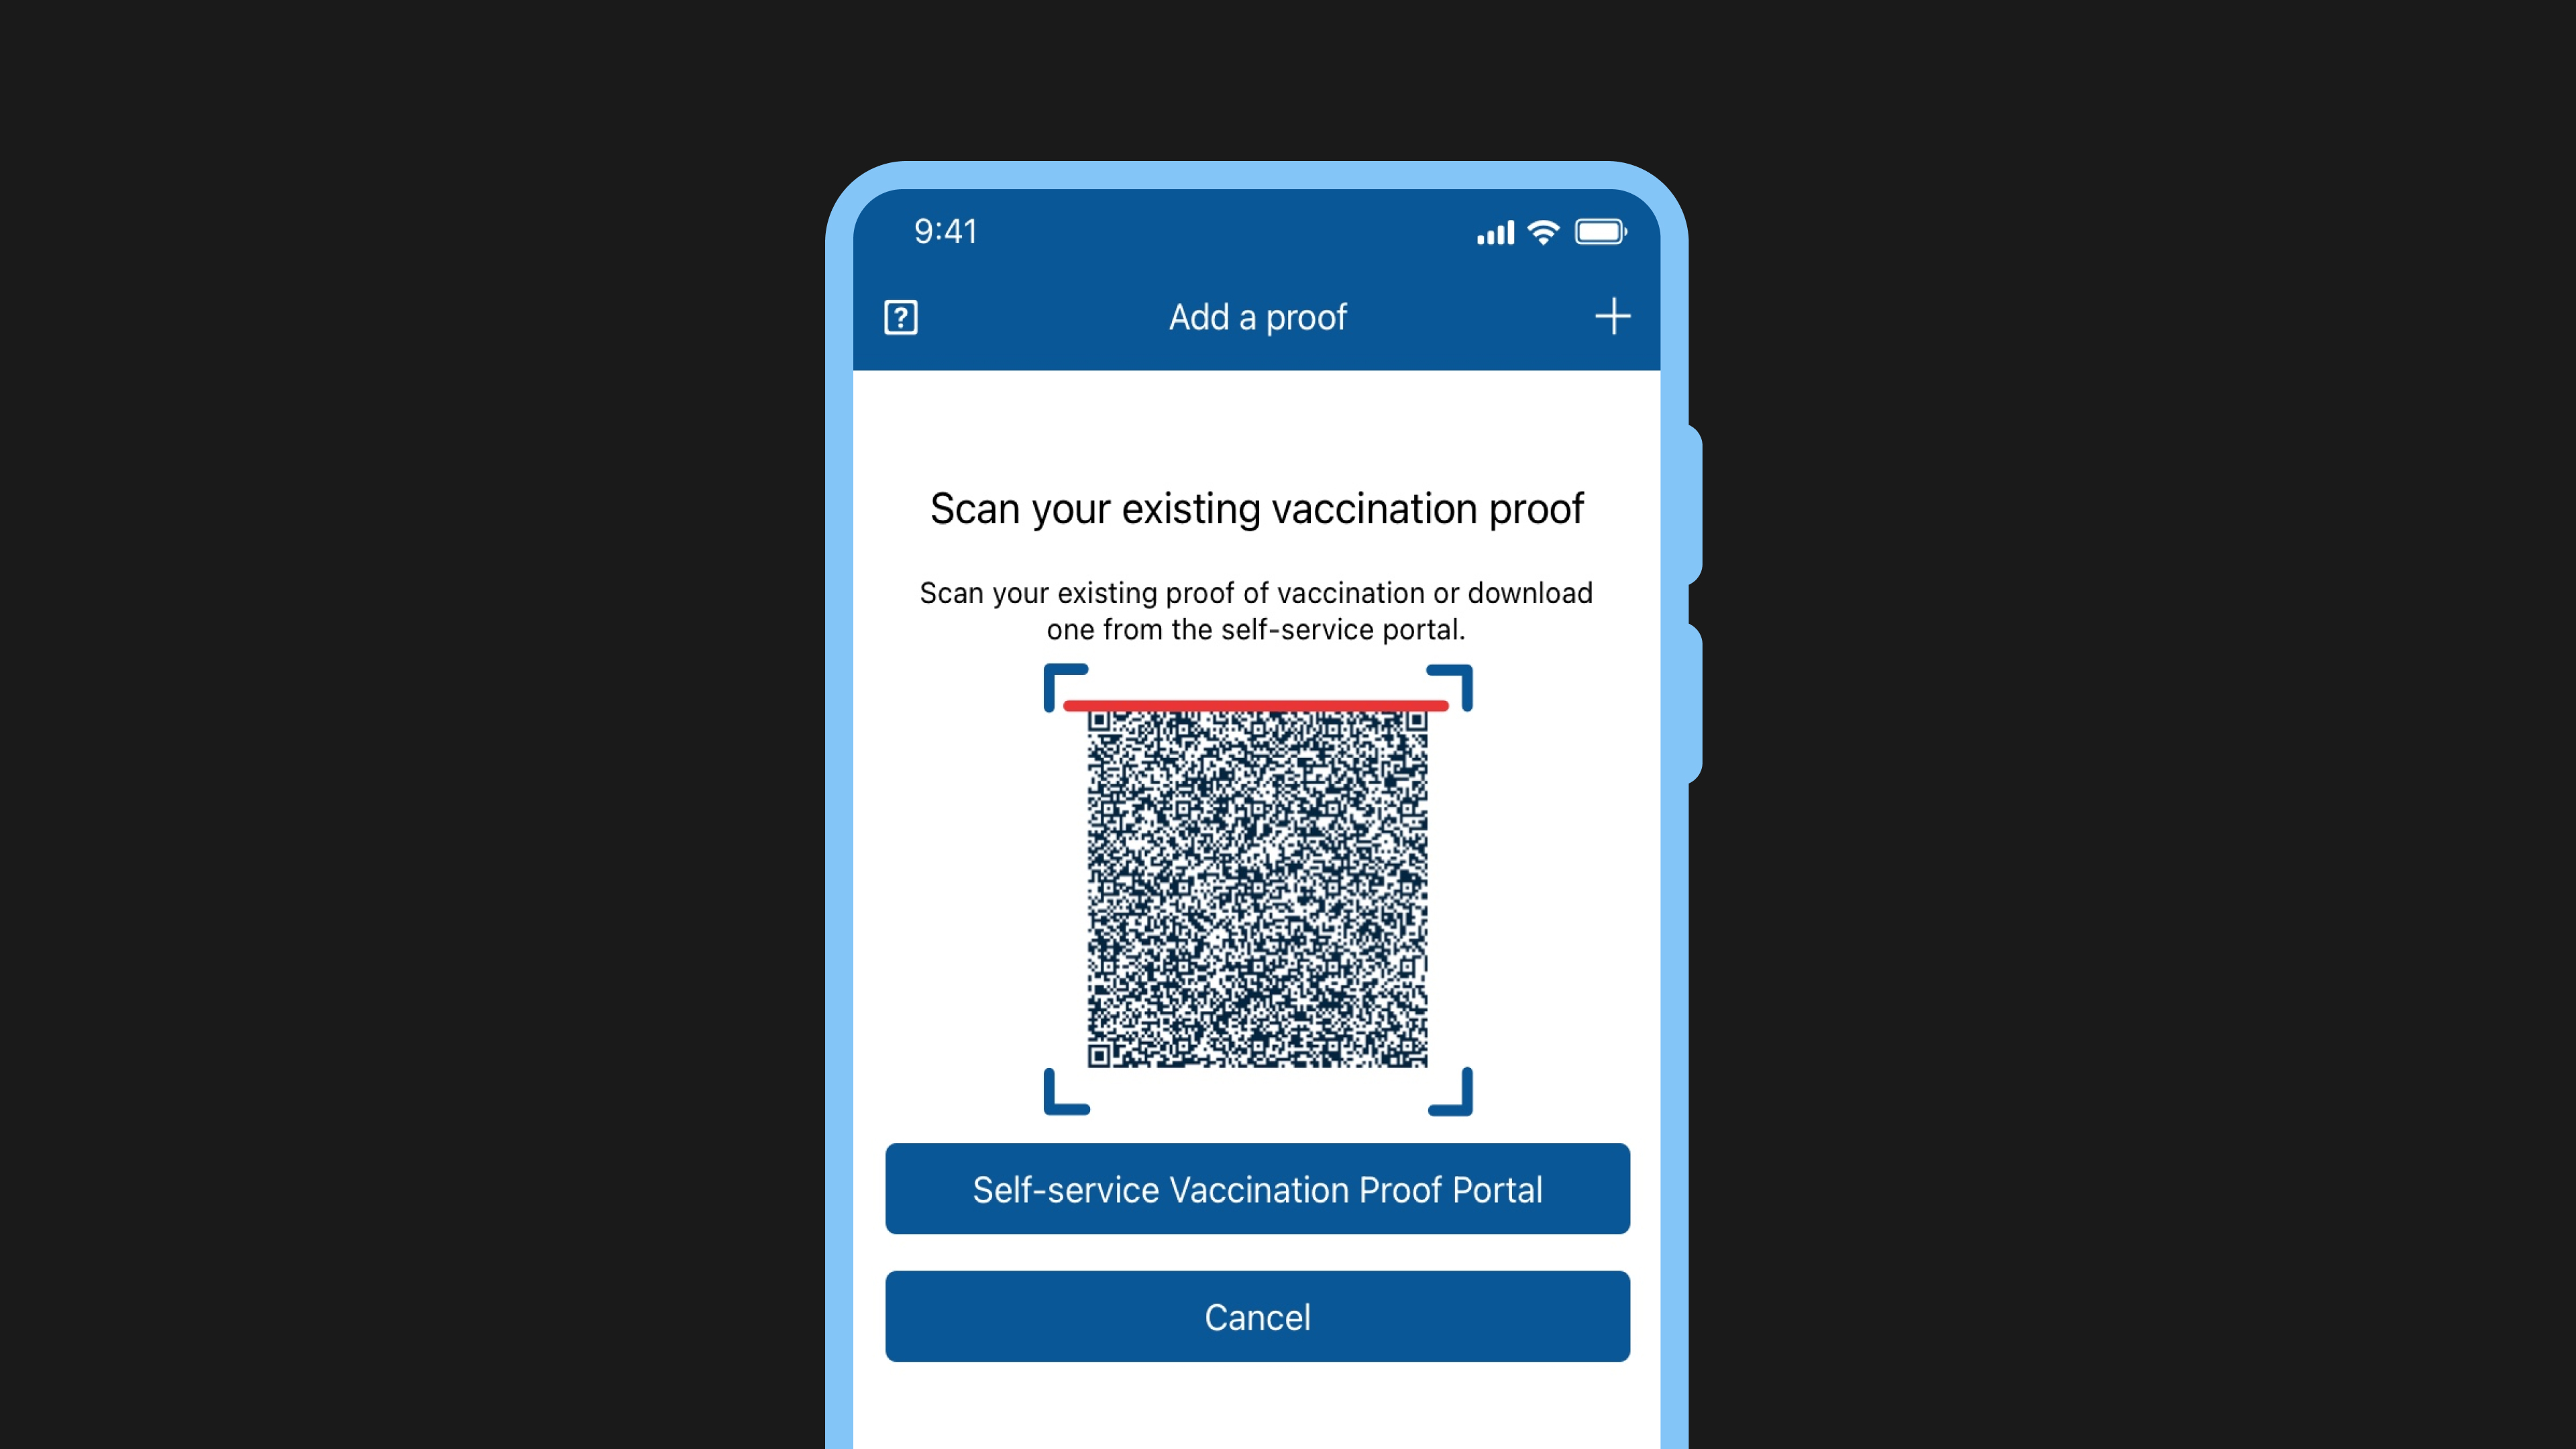 Mobile device showing the 'Add a proof' screen, encouraging users to scan their vaccination proof QR code